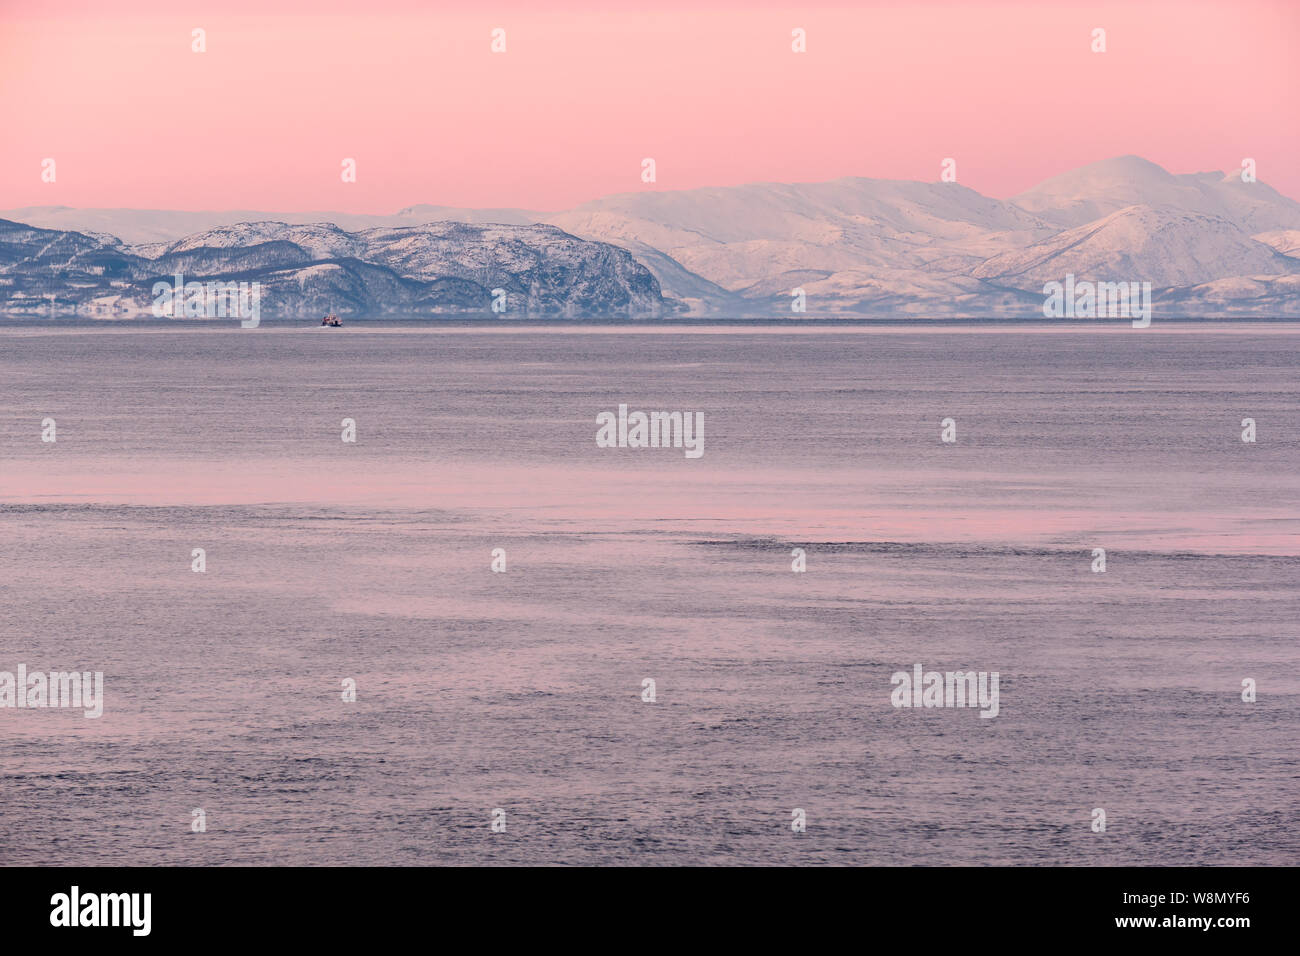 Minimalistic artic landscape under pink sky at sunset, Norway Stock Photo